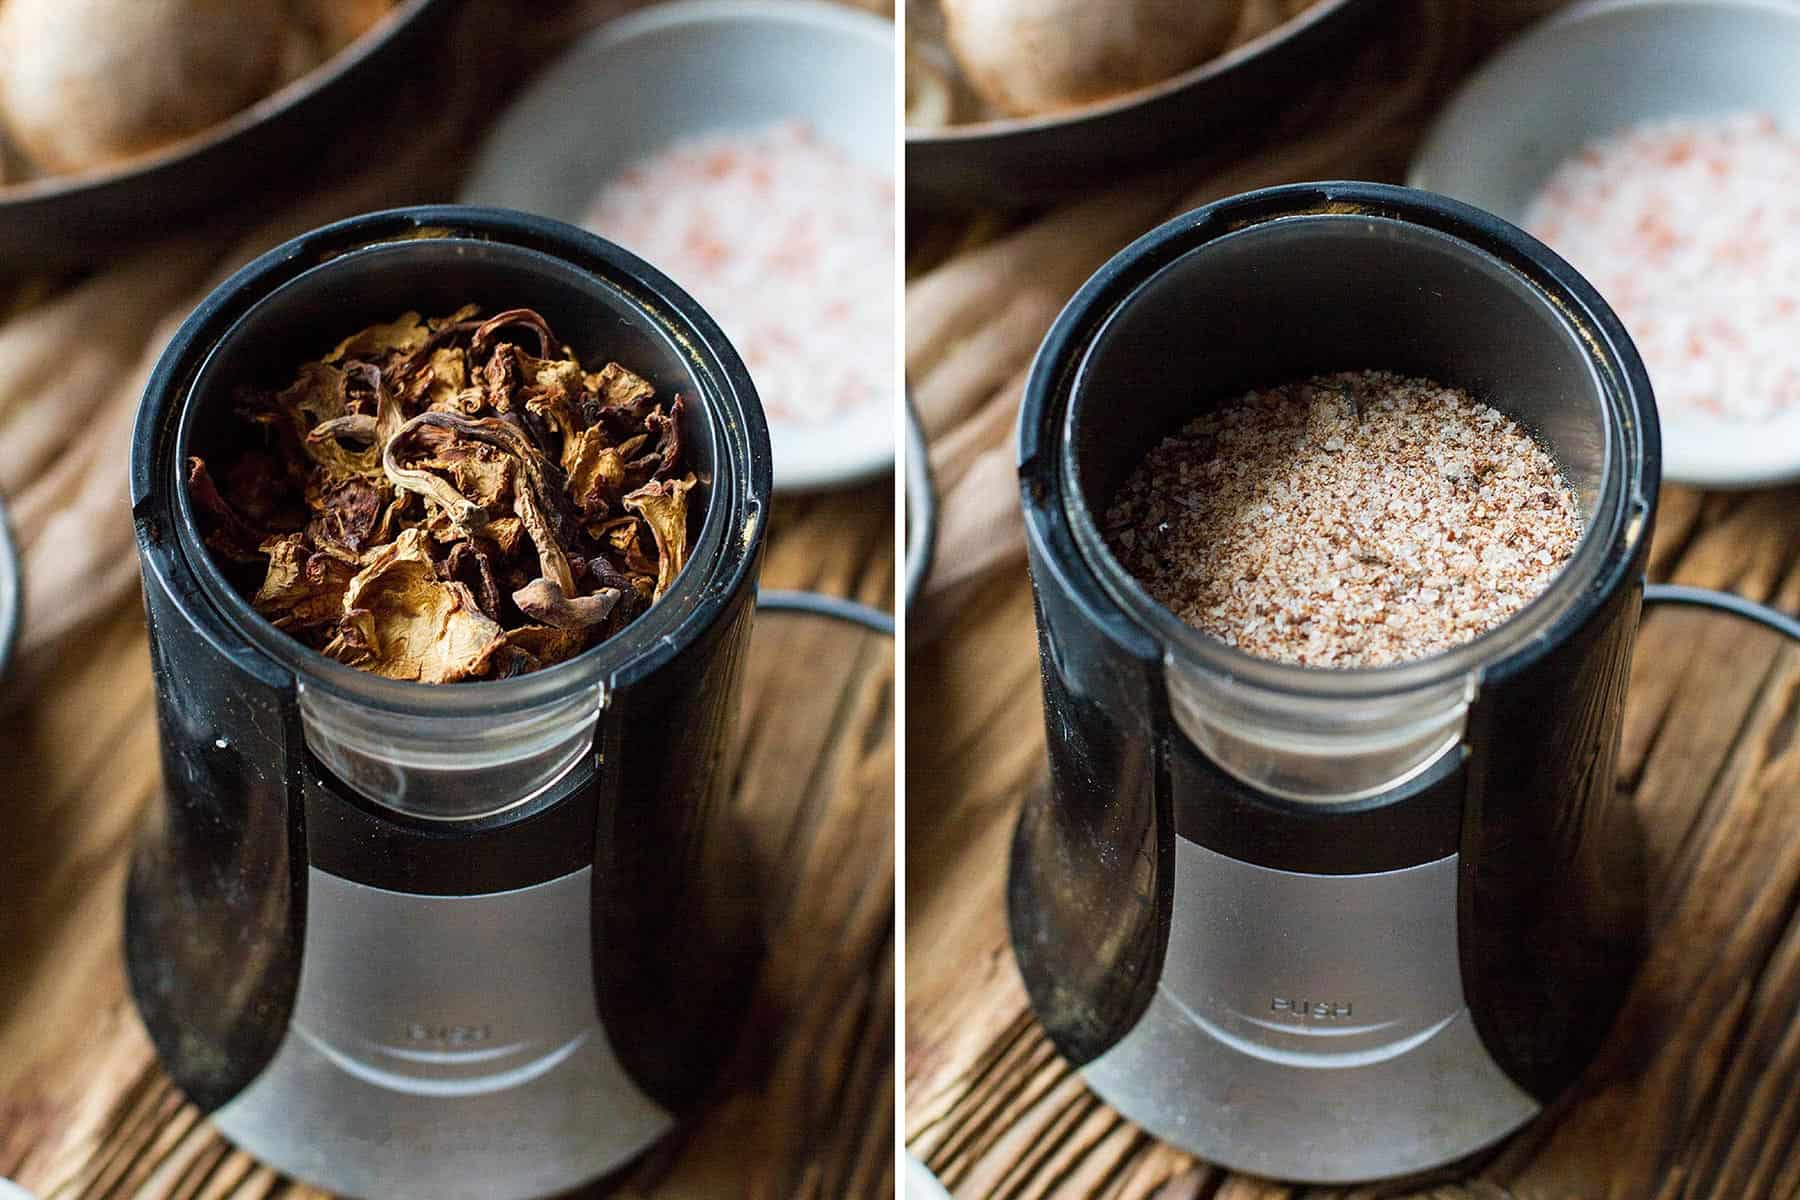 2 images of a spice grinder, one with dried mushroom and one with mushroom powder.